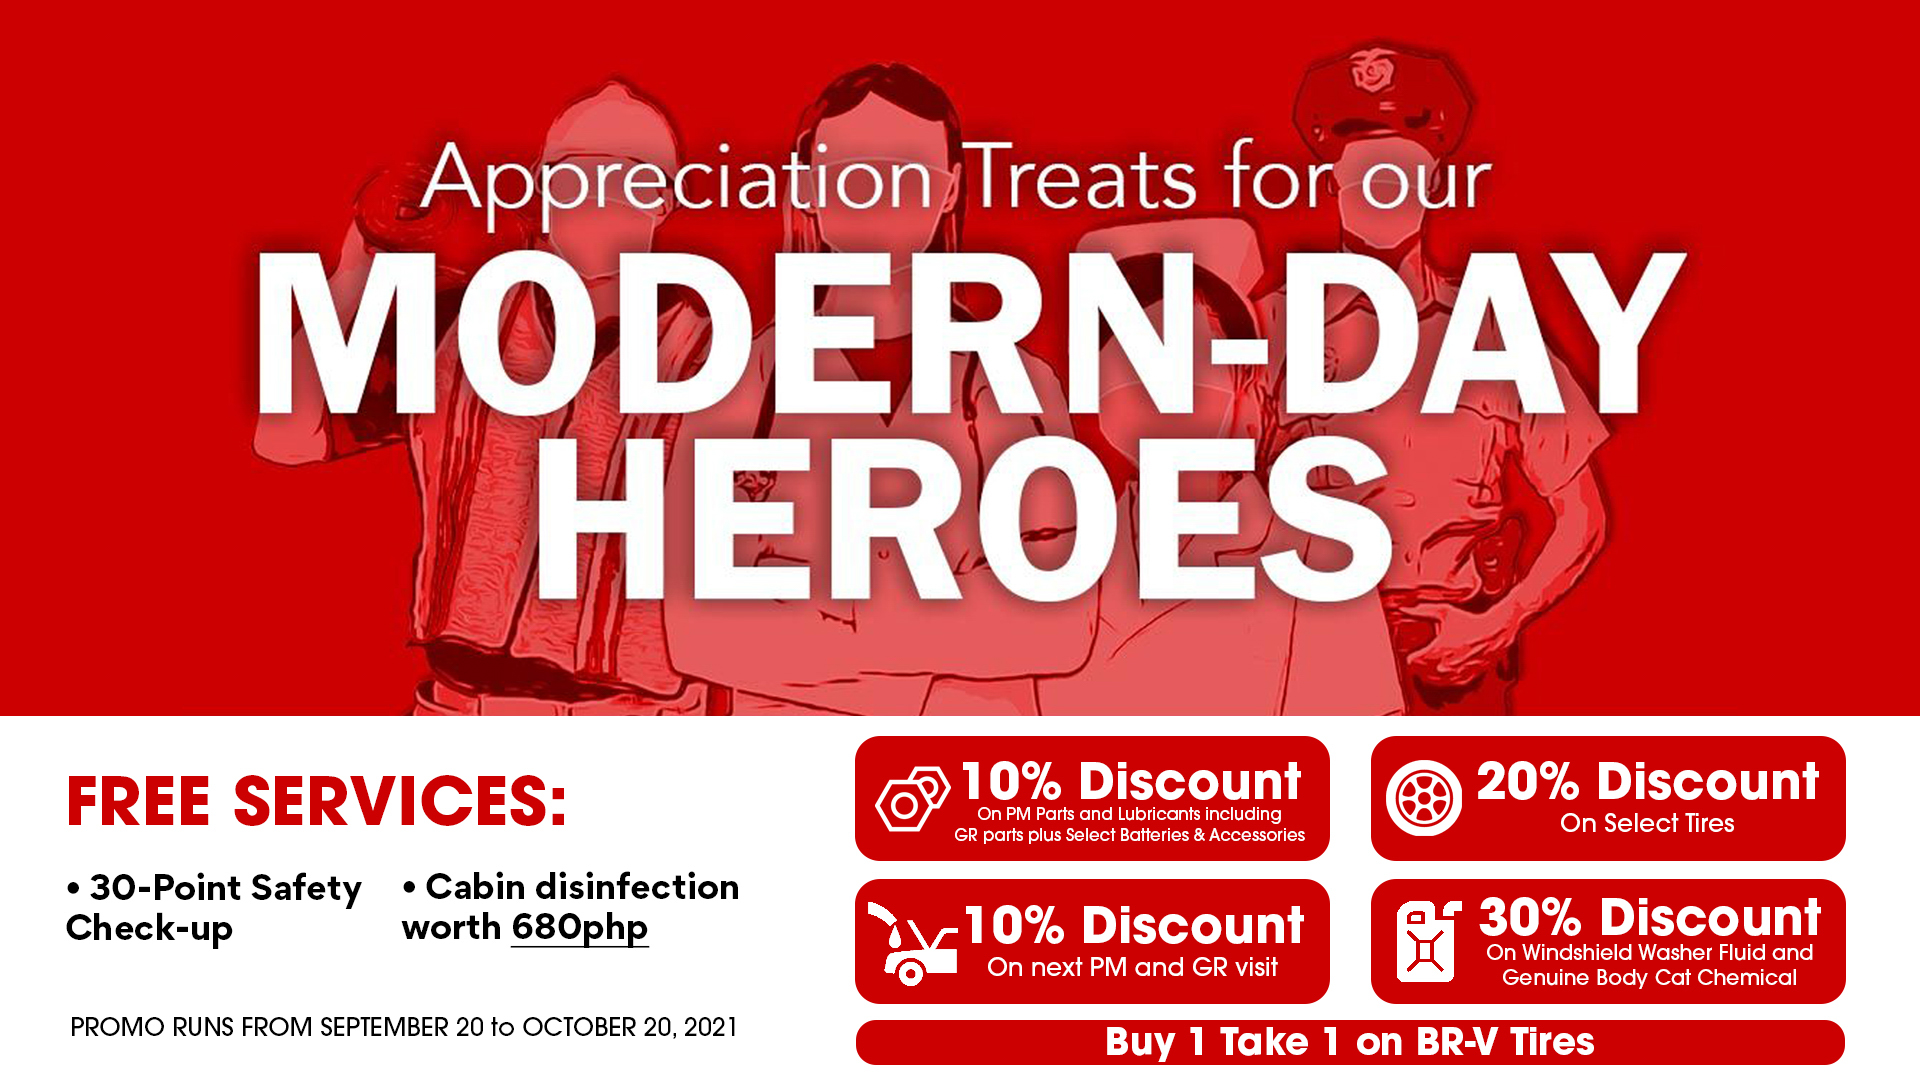 Honda honors frontliners and vaccinated customers with its exclusive deals and offers under Modern-Day Heroes promo